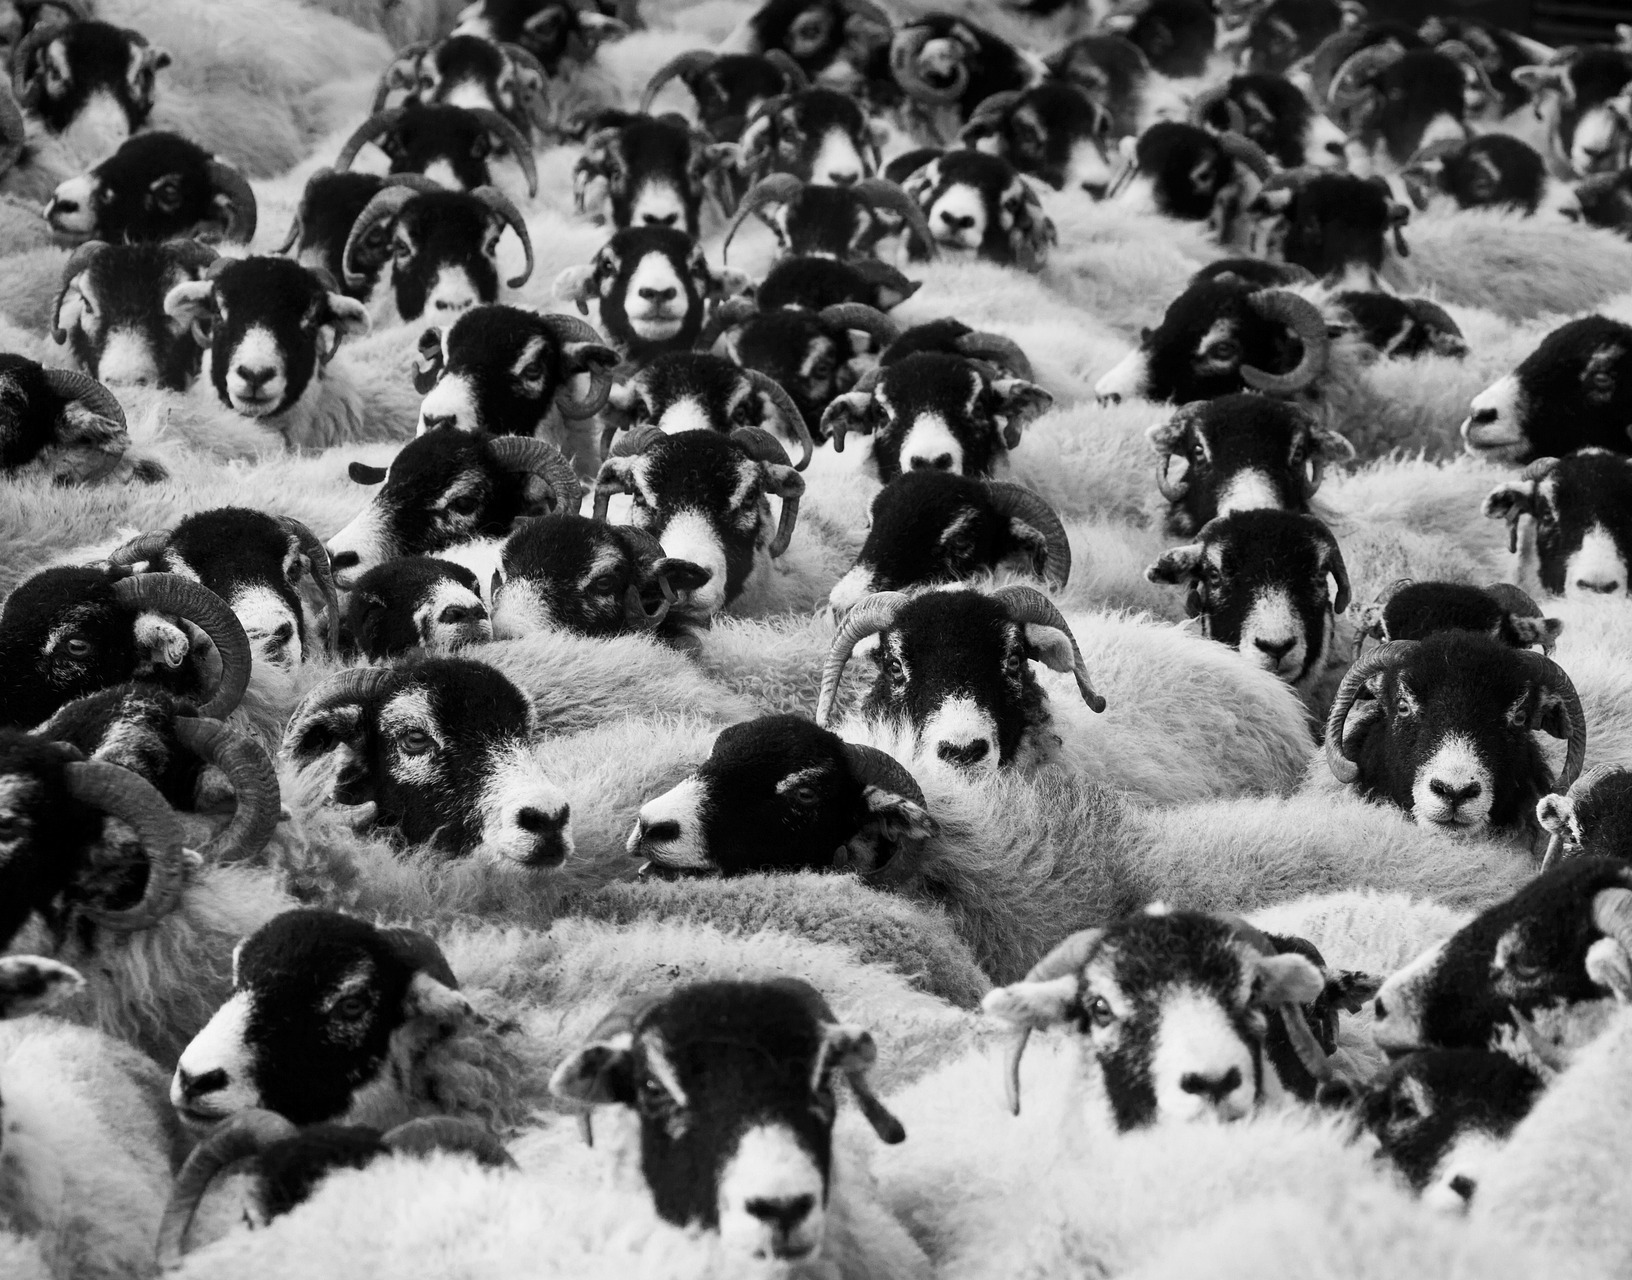 Black and white photo of herd of sheep